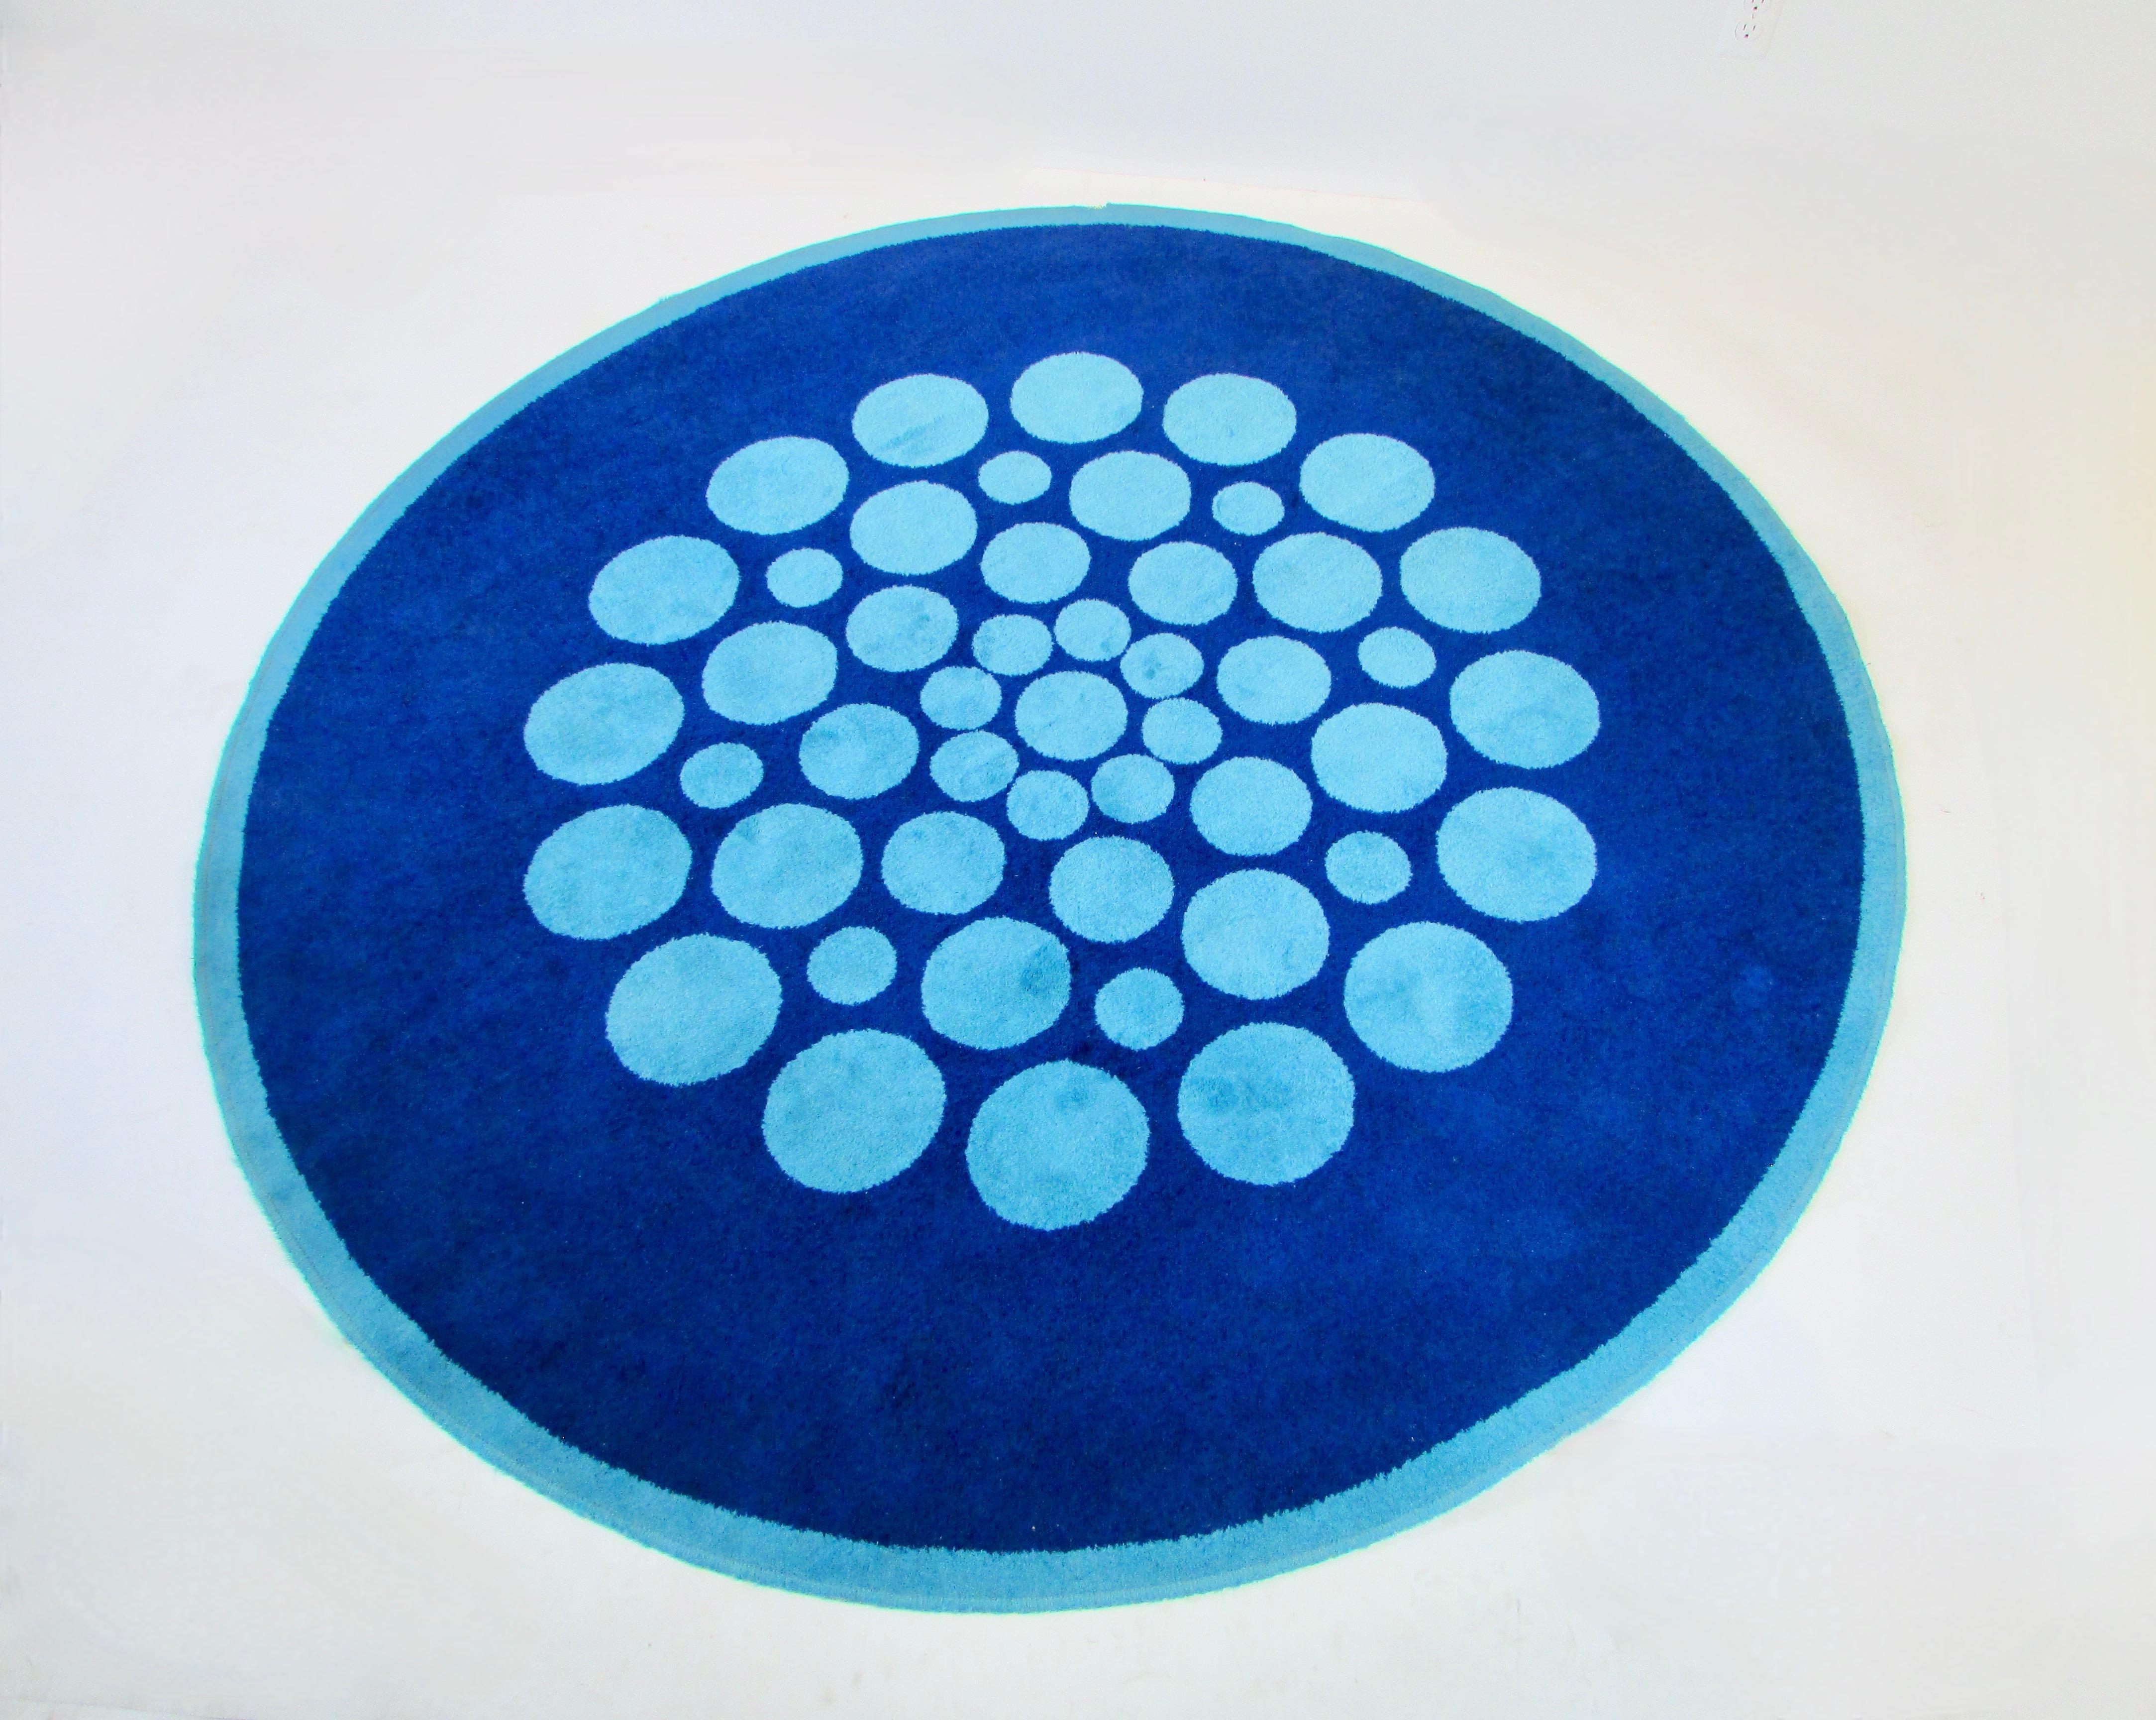 Op Pop Light Blue Circles on Darker Blue Field round Area Rug In Good Condition For Sale In Ferndale, MI